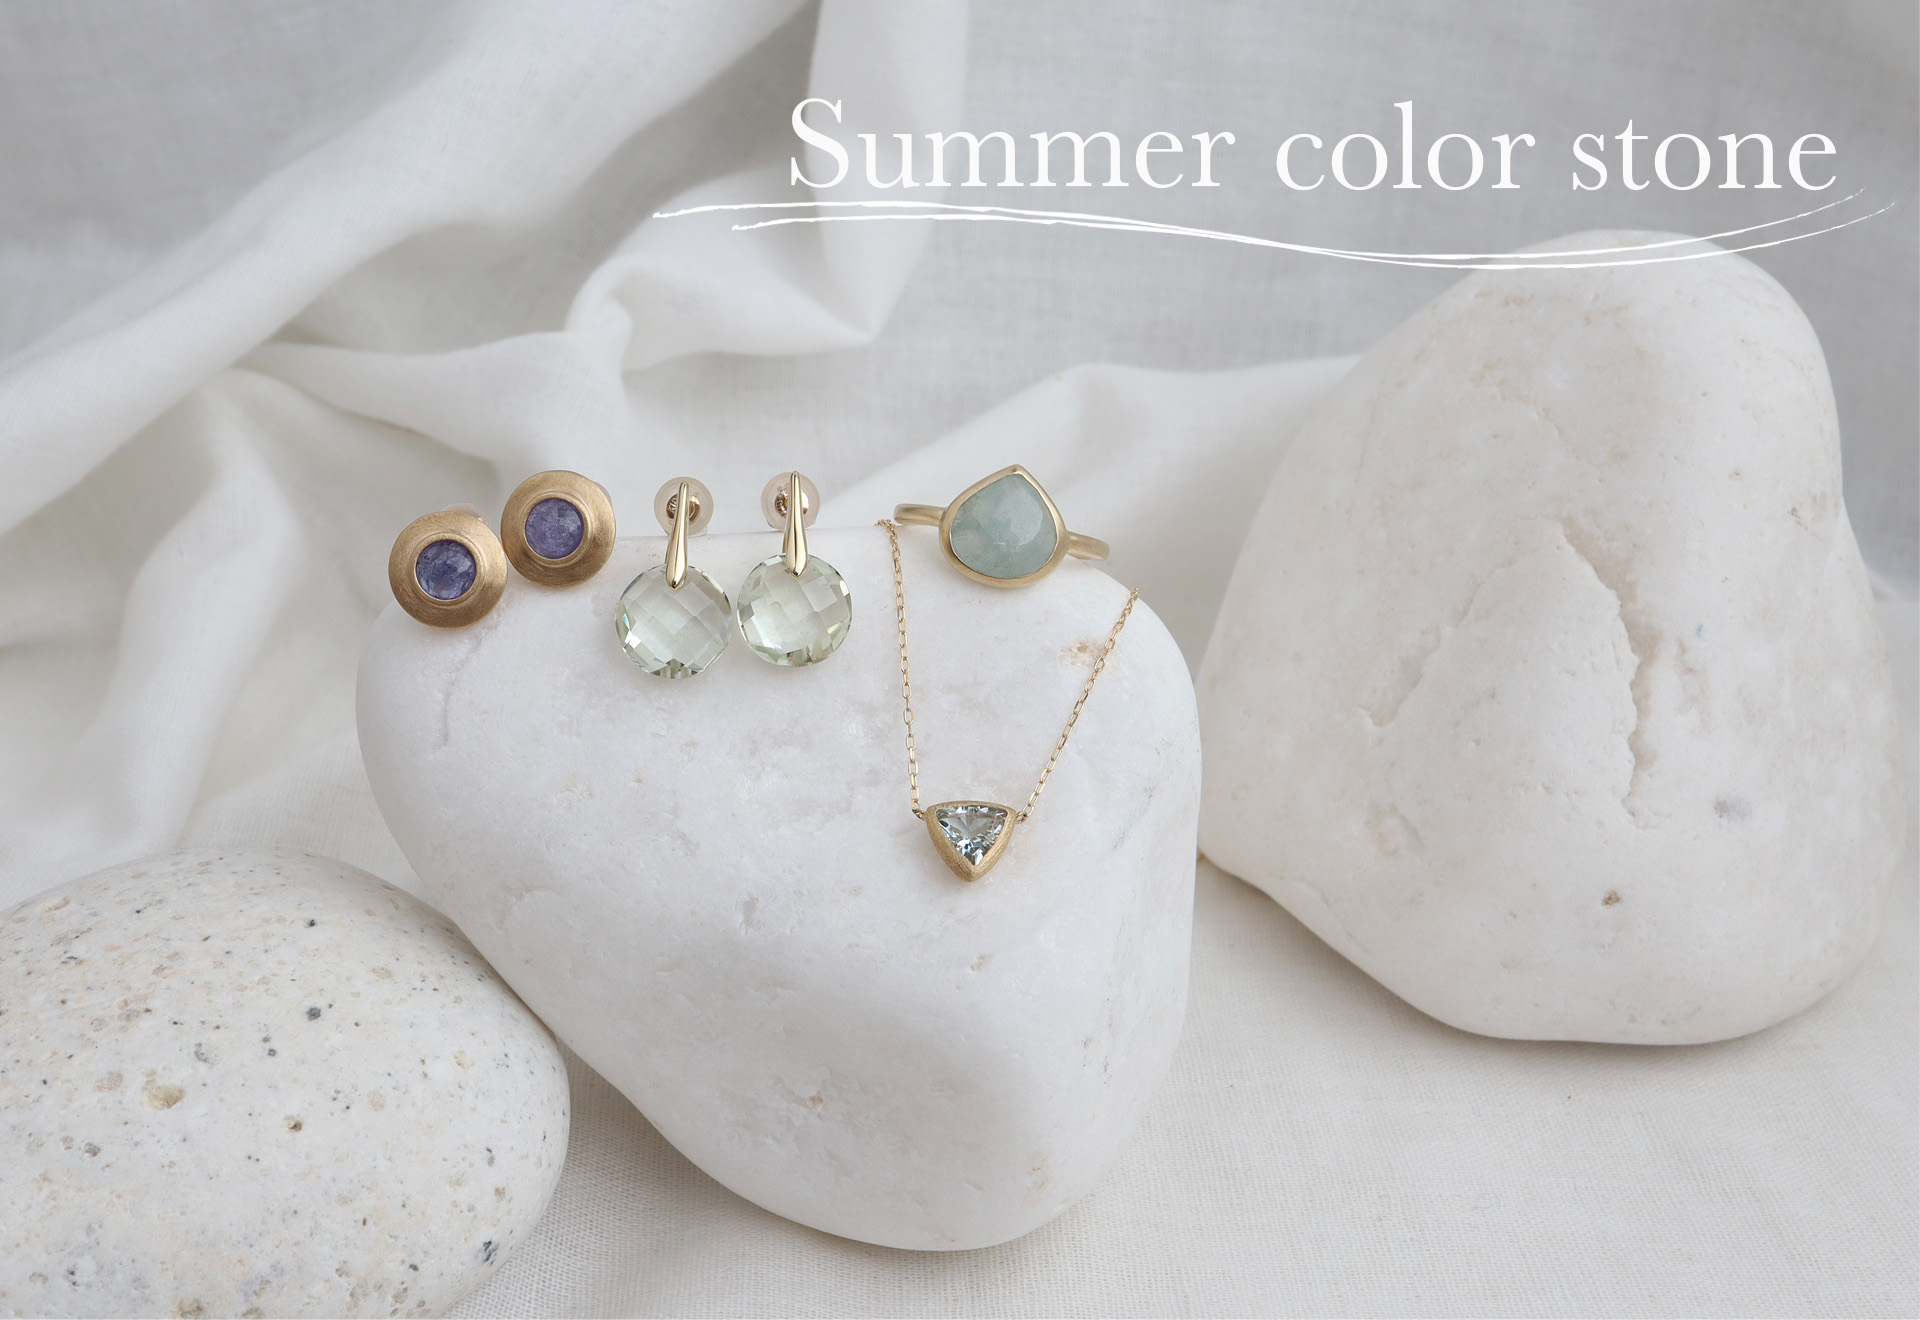 Summer color stone